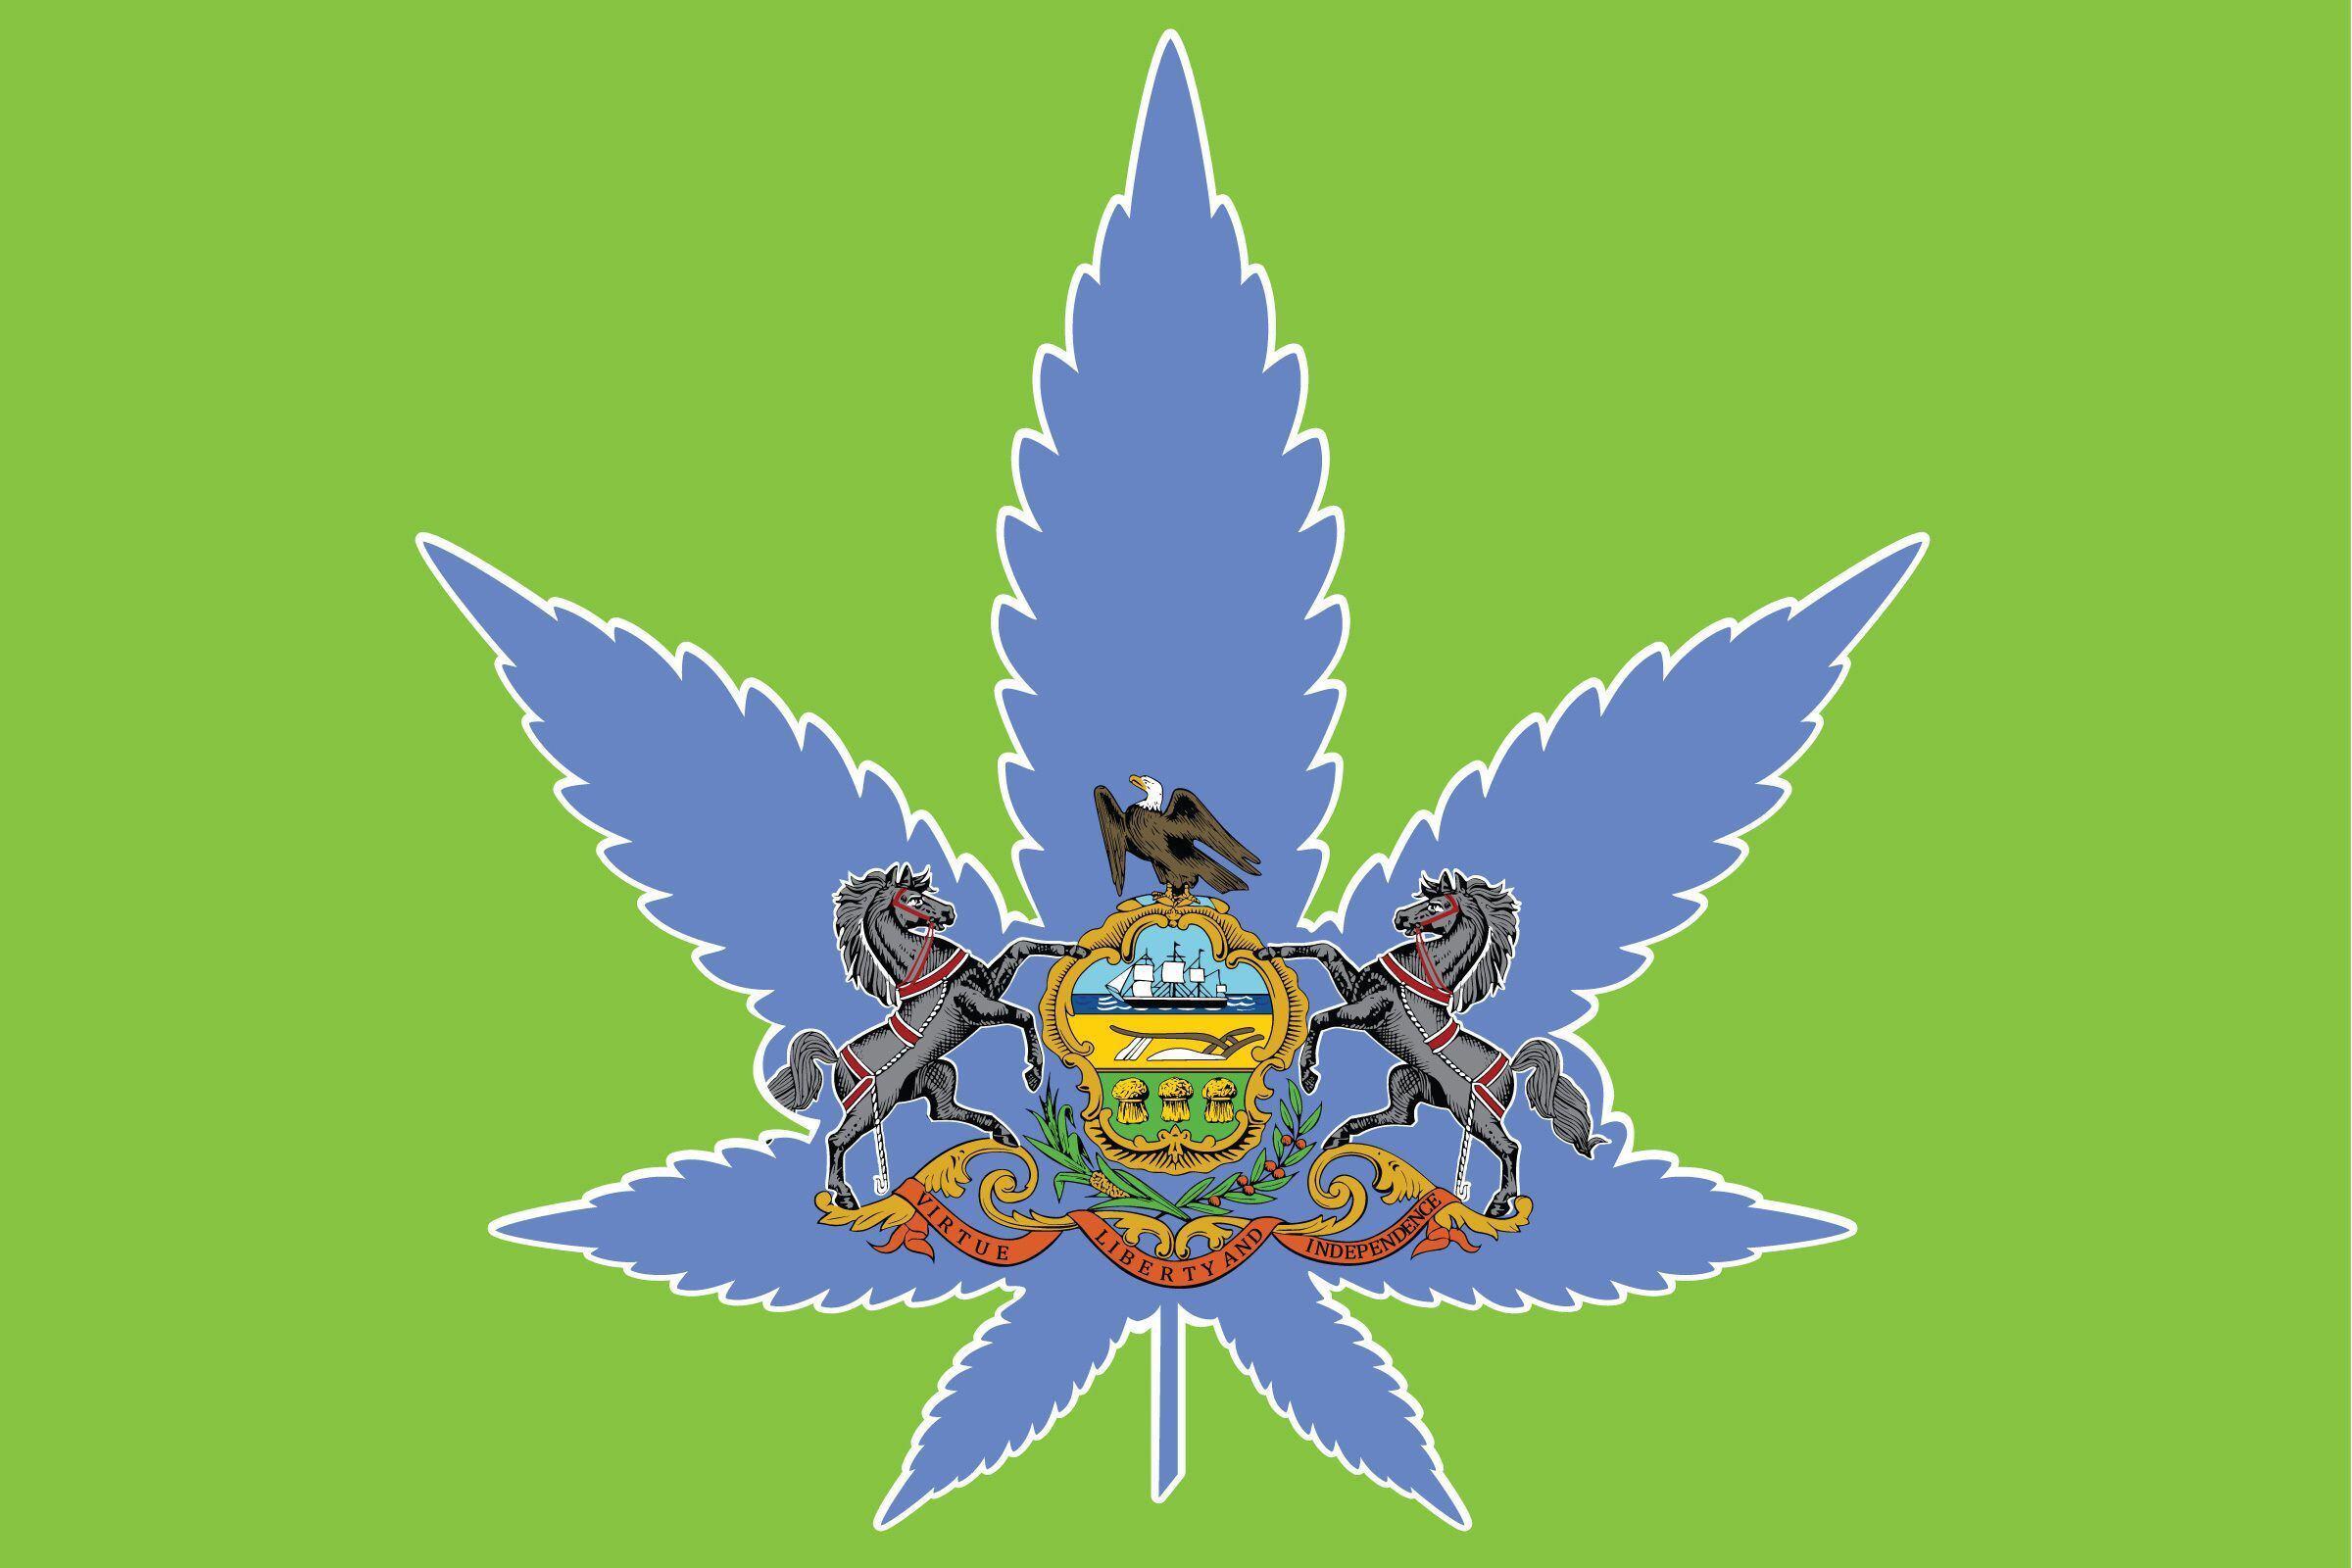 Is weed legal in Pa. in 2022? No, but marijuana legalization could come.